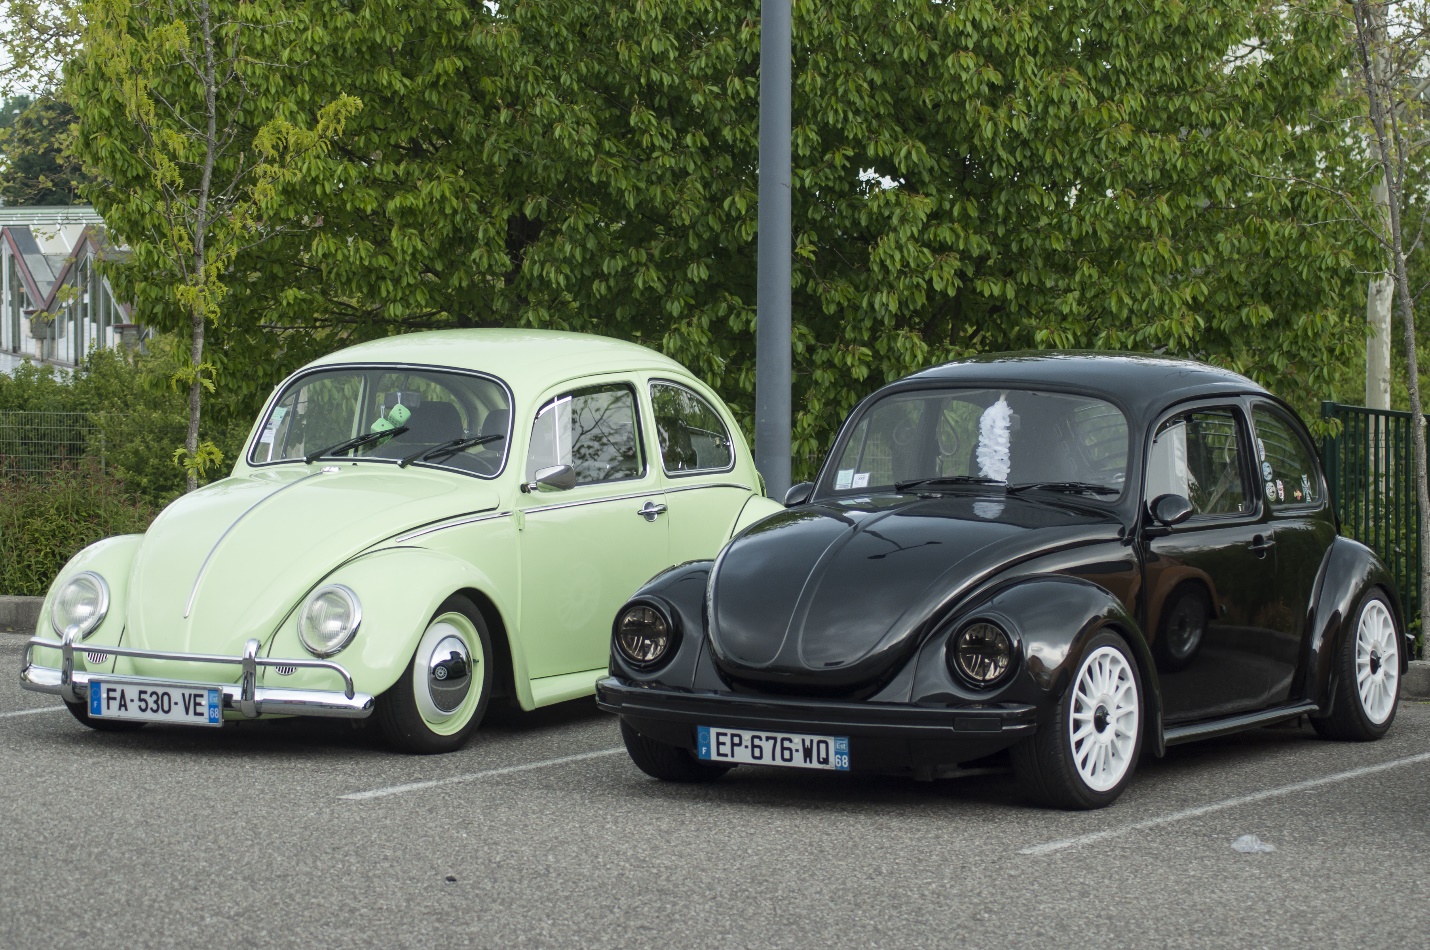 black and green old Volkswagen beetle parked in the street